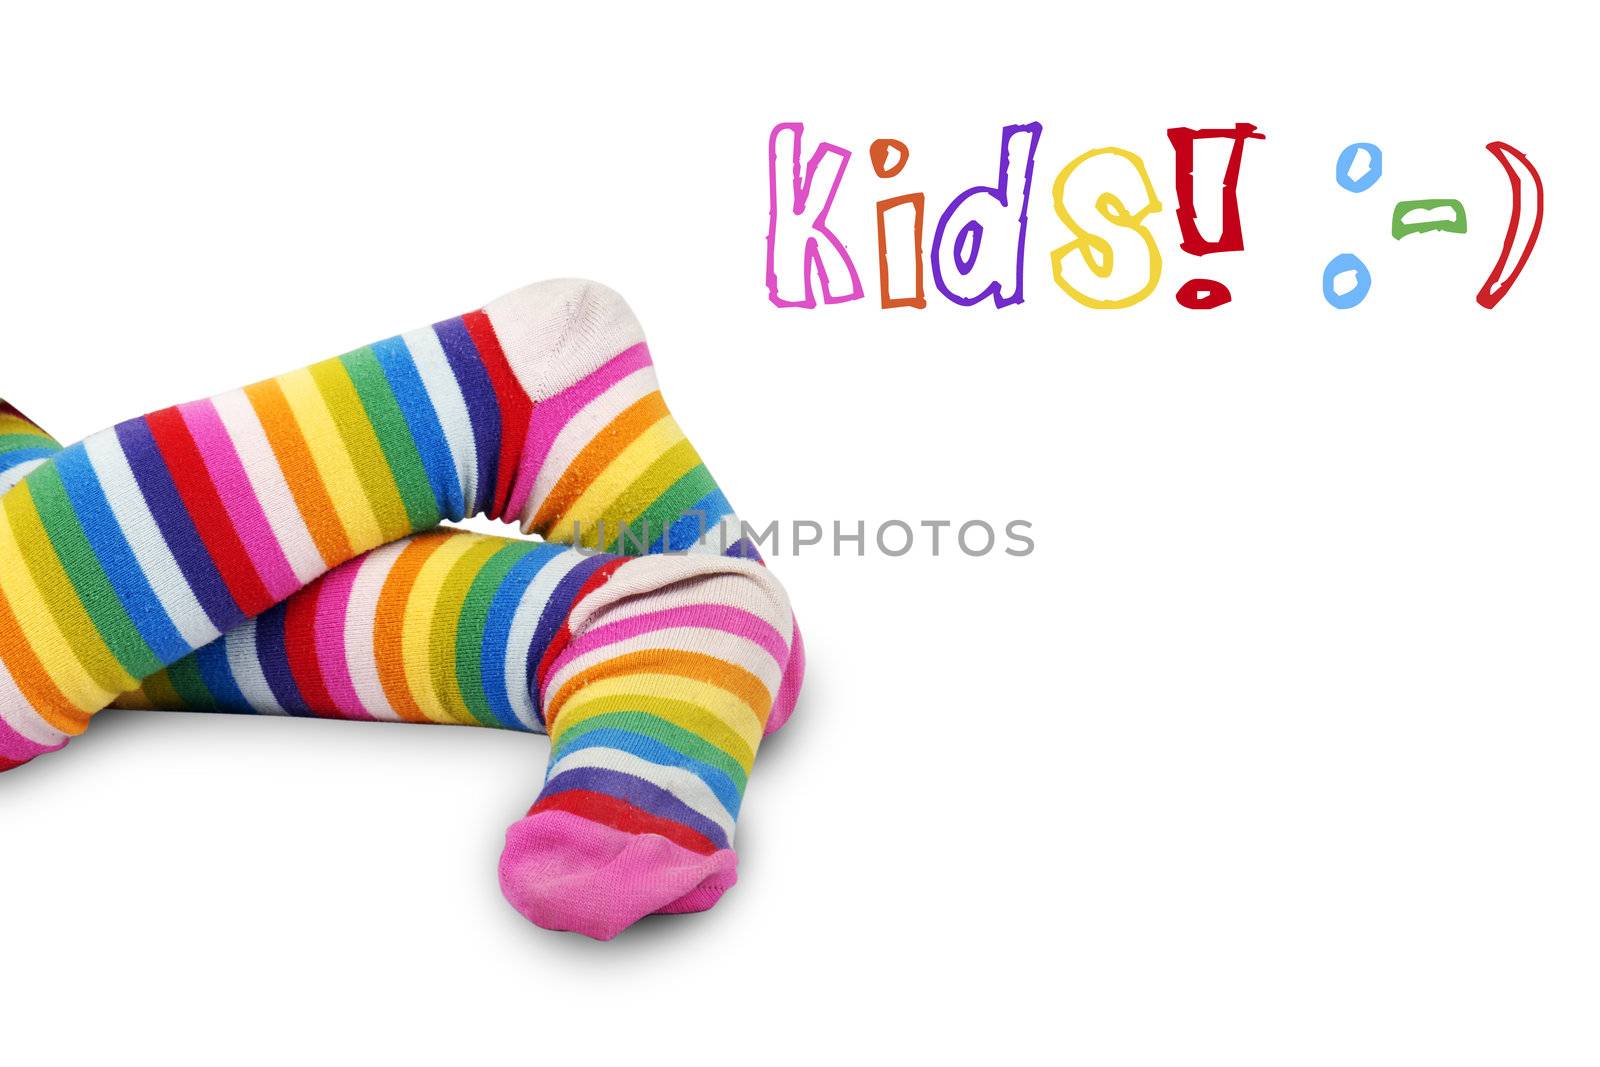 Funny shot of a little girl's crossed feet in very colorful striped socks or tights over white with kids and happy face symbols: perfect for anything relating to kids.